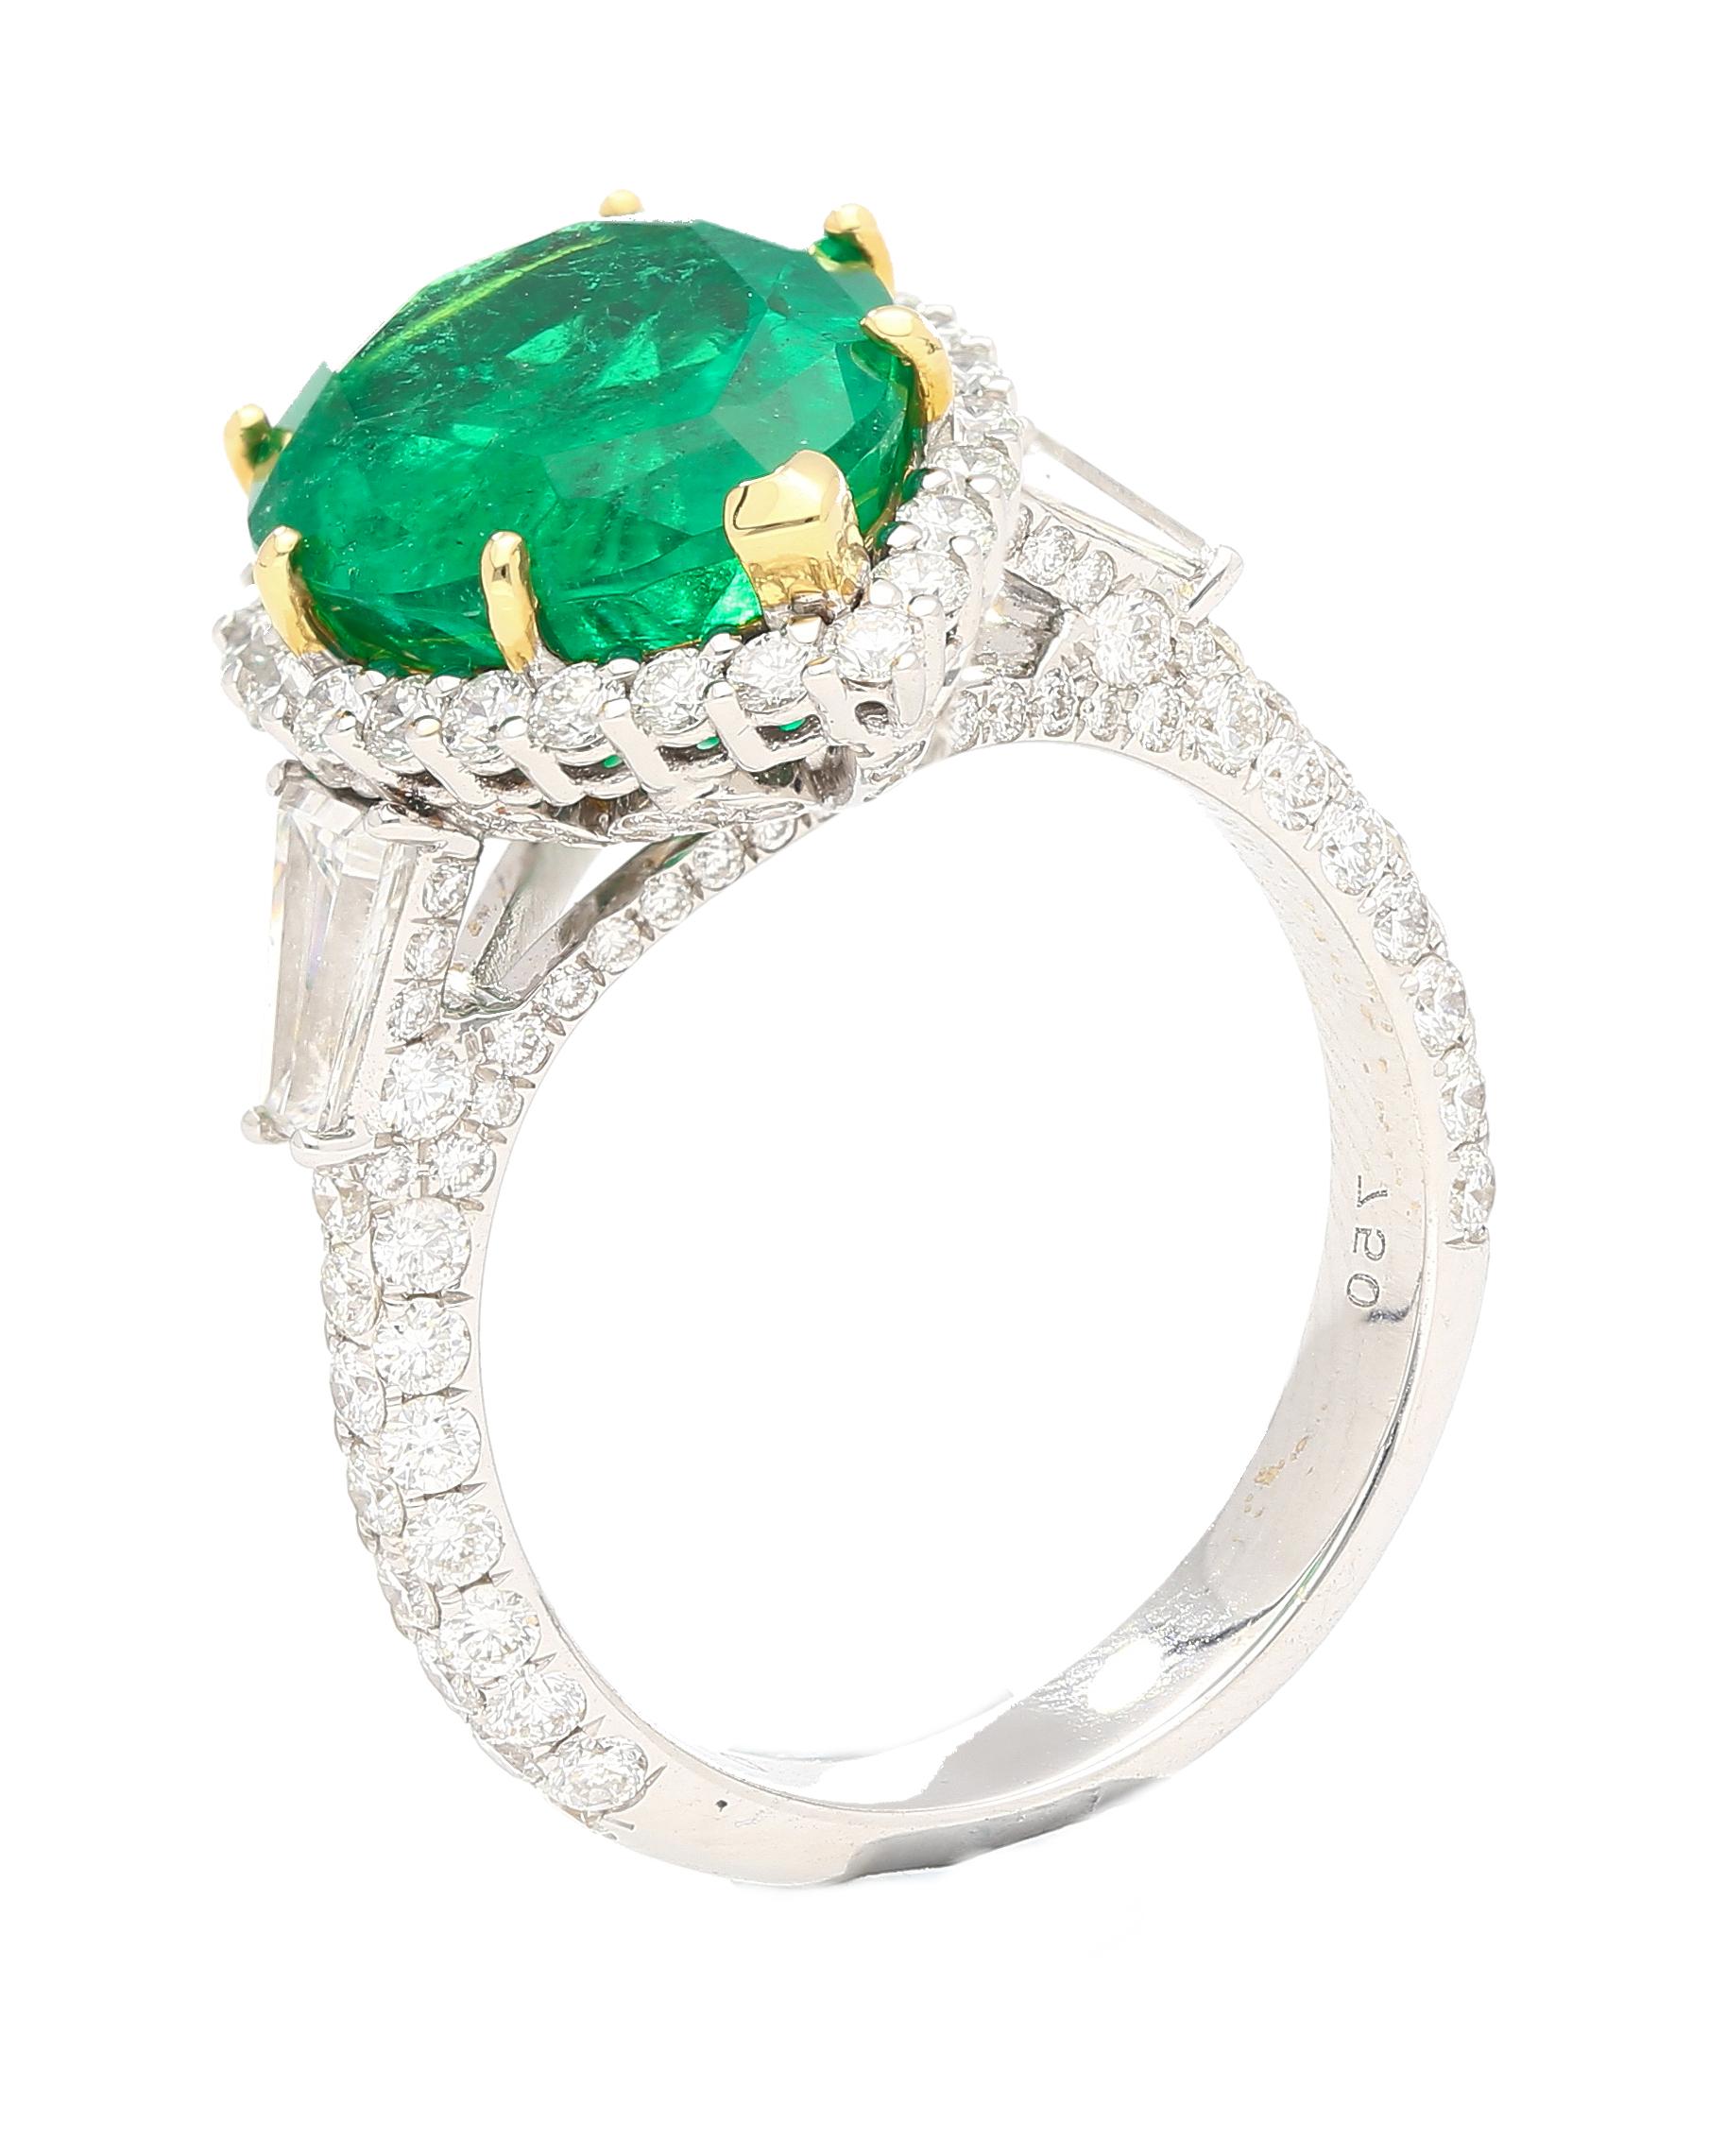 5.12 Carat Vivid Green Pear Cut Colombian Emerald and Diamond Ring in 18K Gold For Sale 2